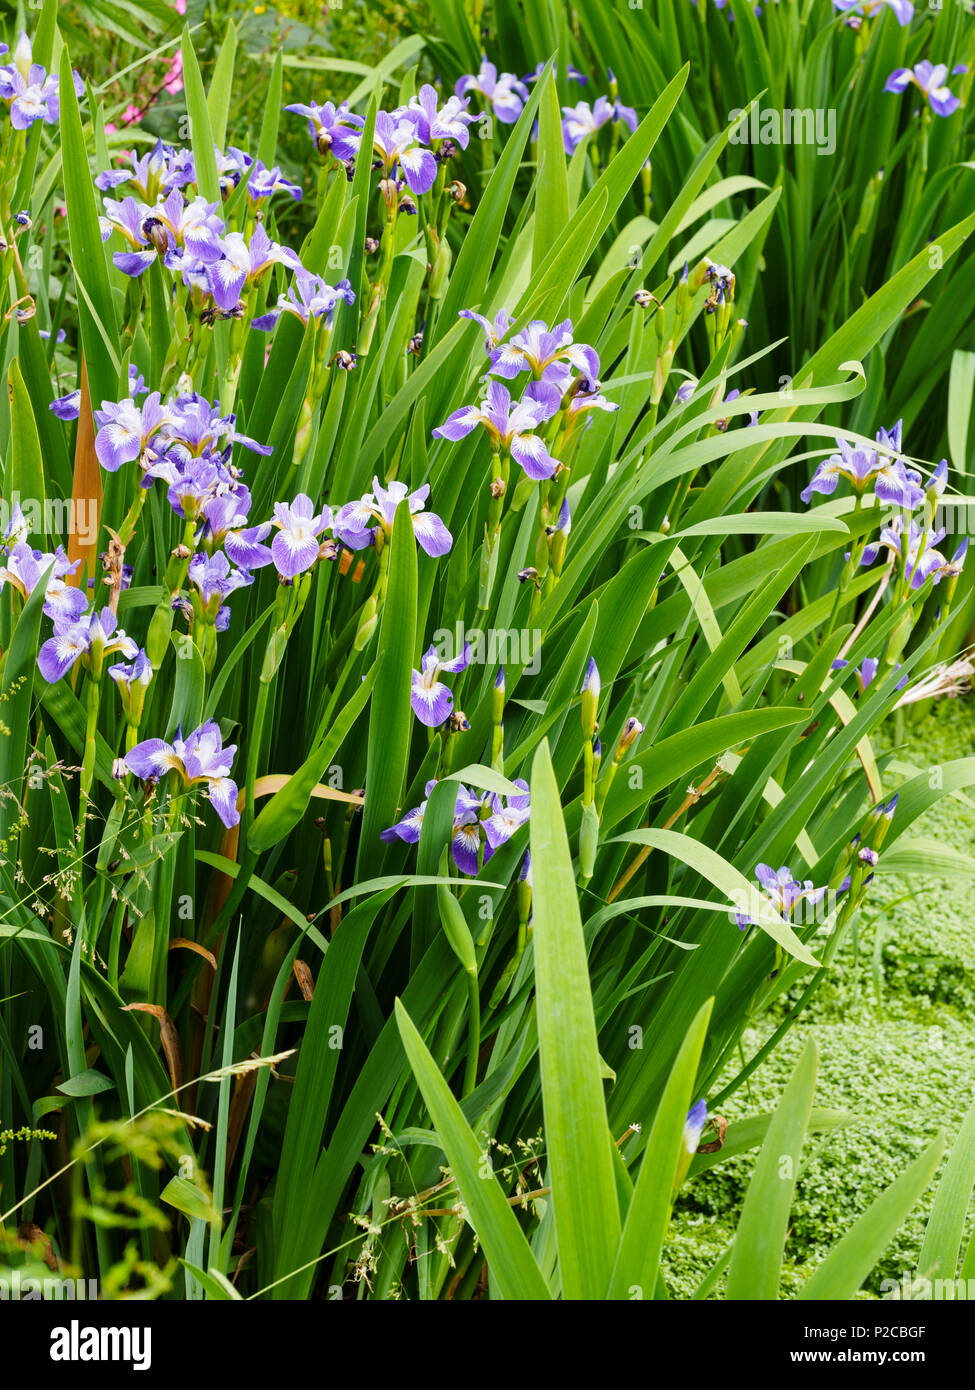 Blue and white early ummer flowers of the marginal aquatic hardy iris, Iris versicolor 'Rowden Cantata' Stock Photo